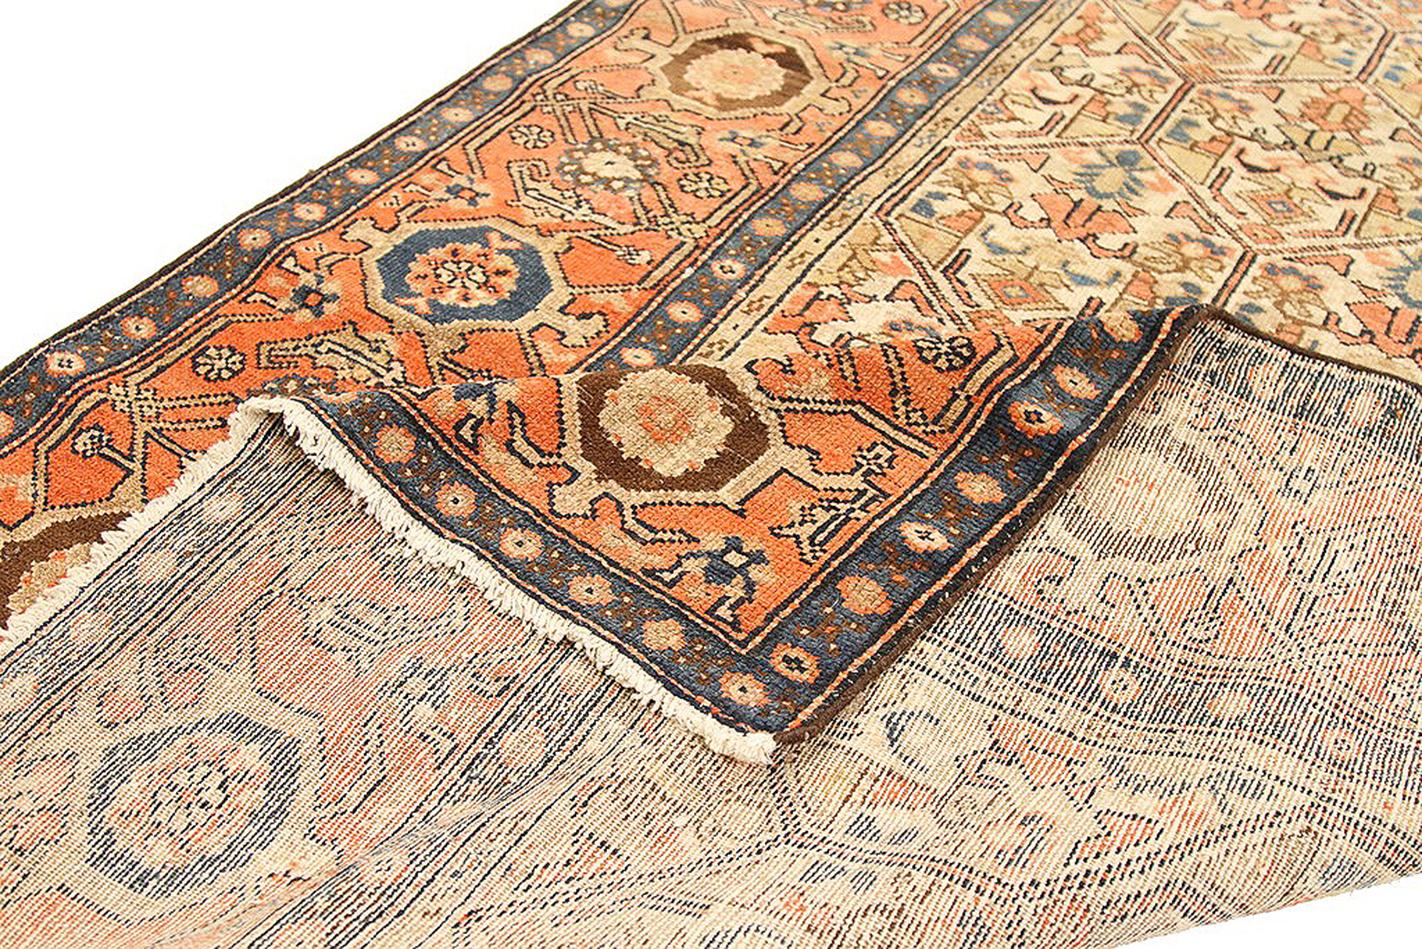 Antique Persian Malayer Runner Rug with Beige and Orange Floral Medallions In Excellent Condition For Sale In Dallas, TX